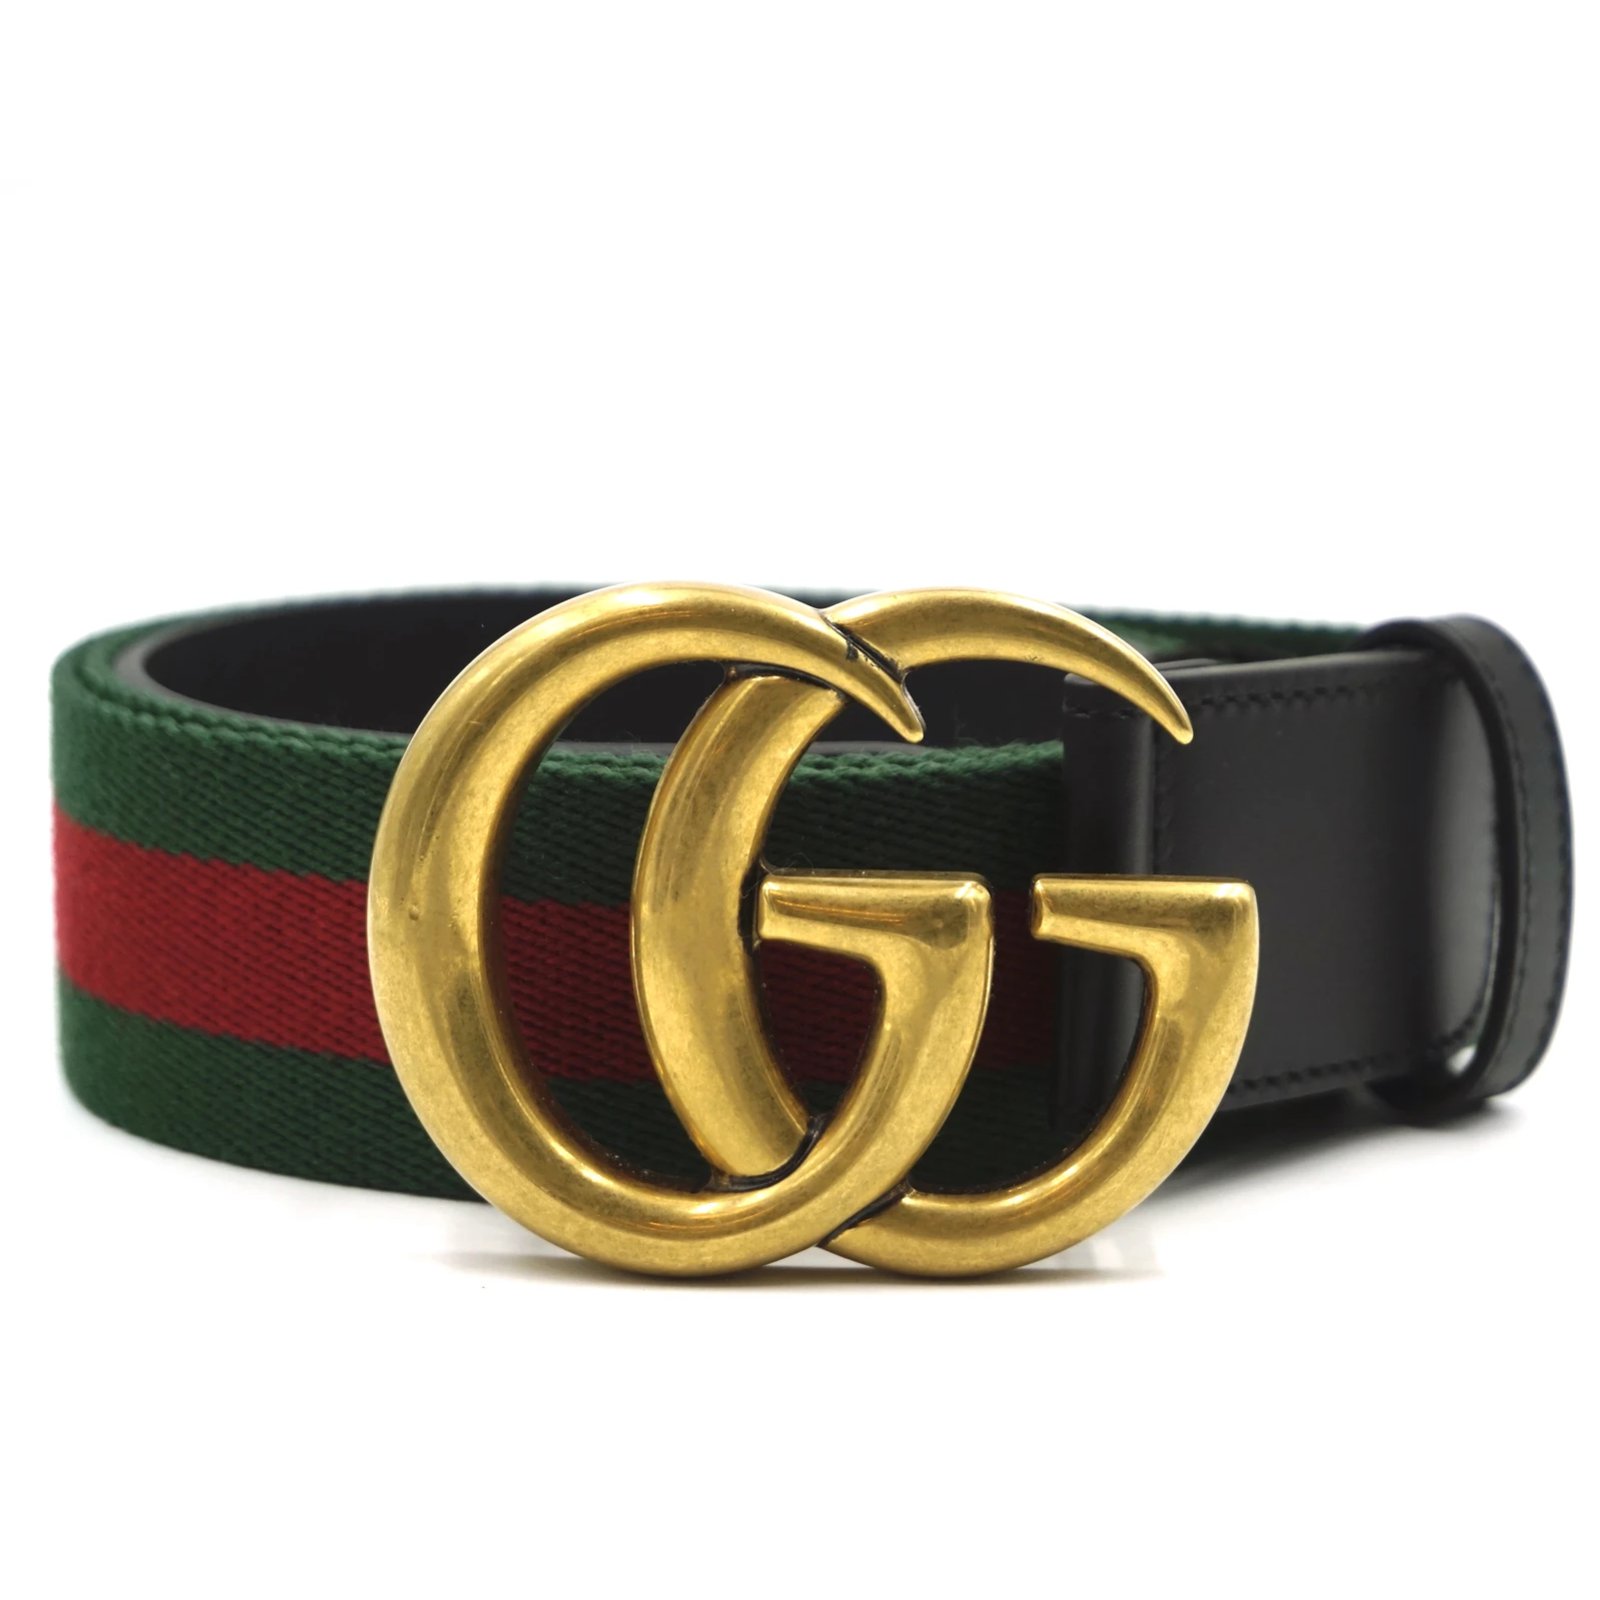 gucci belt red and green gold buckle